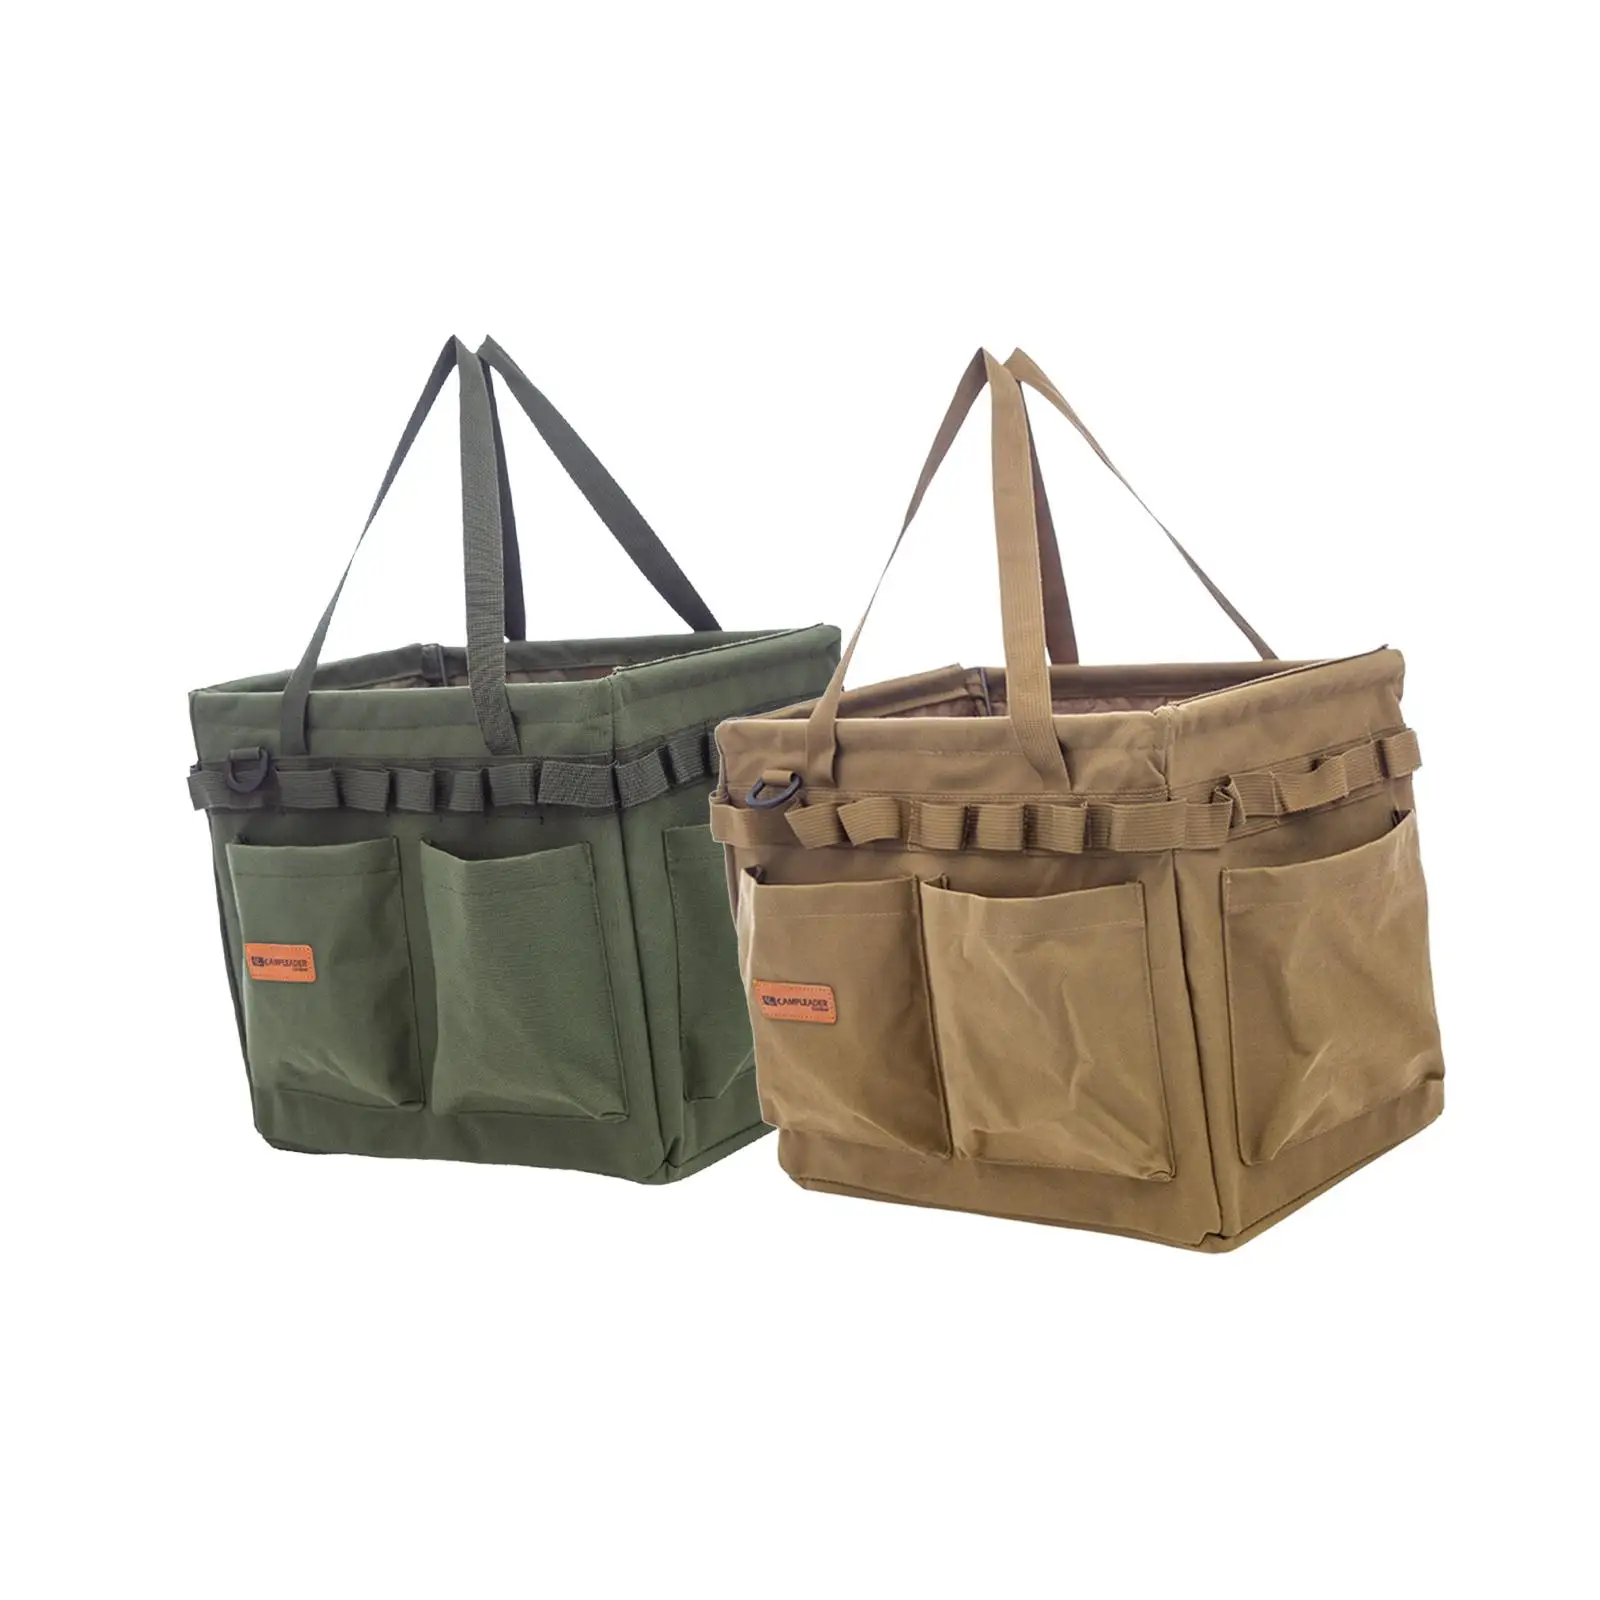 one pulled Storage Bag Foldable Picnic Basket Four in1 Bottom Storage Bag for Household Hiking BBQ